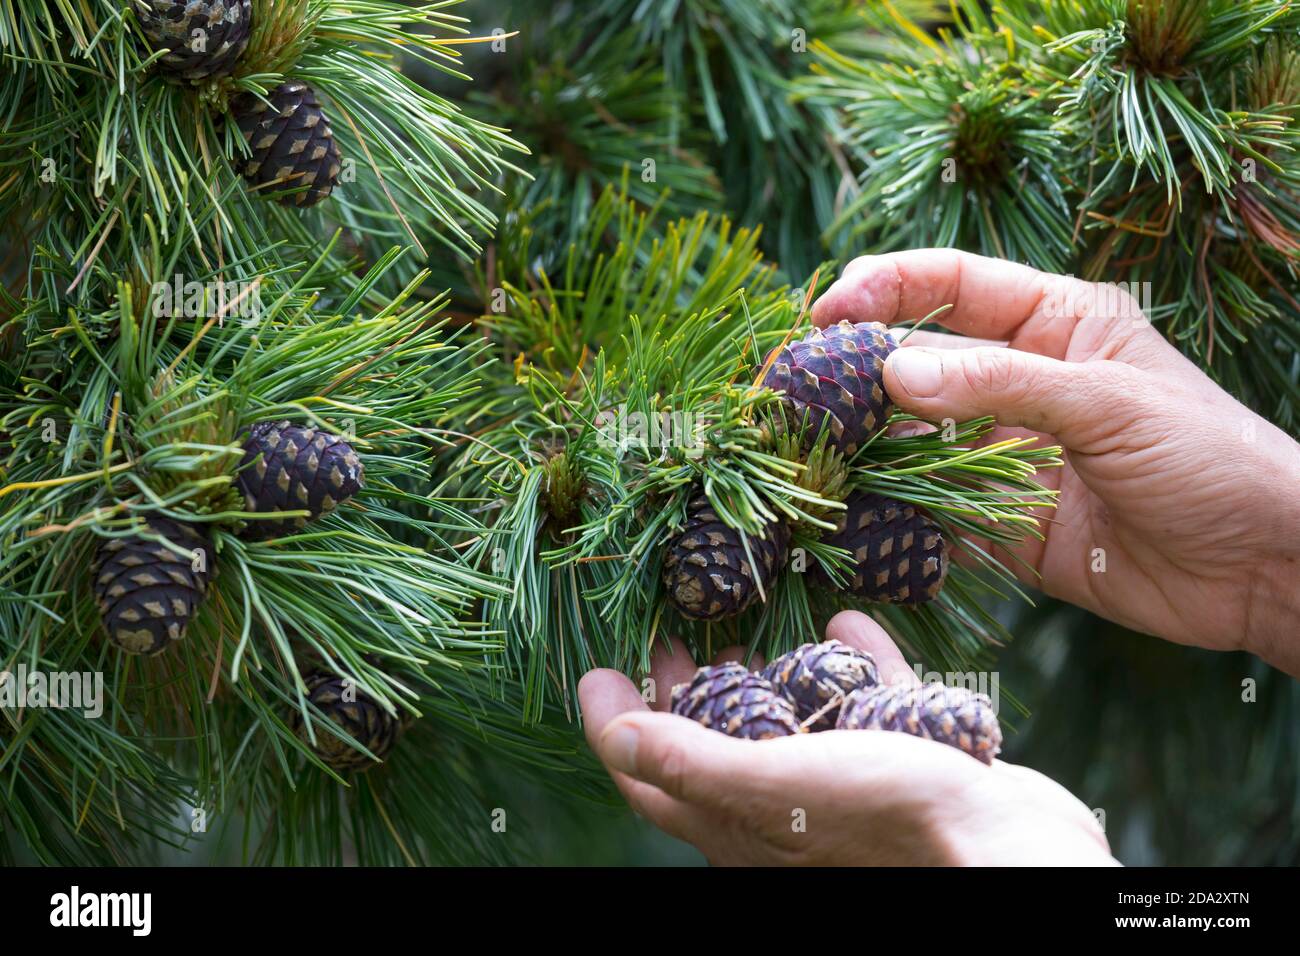 Swiss stone pine, arolla pine (Pinus cembra), cones are collected, Germany Stock Photo